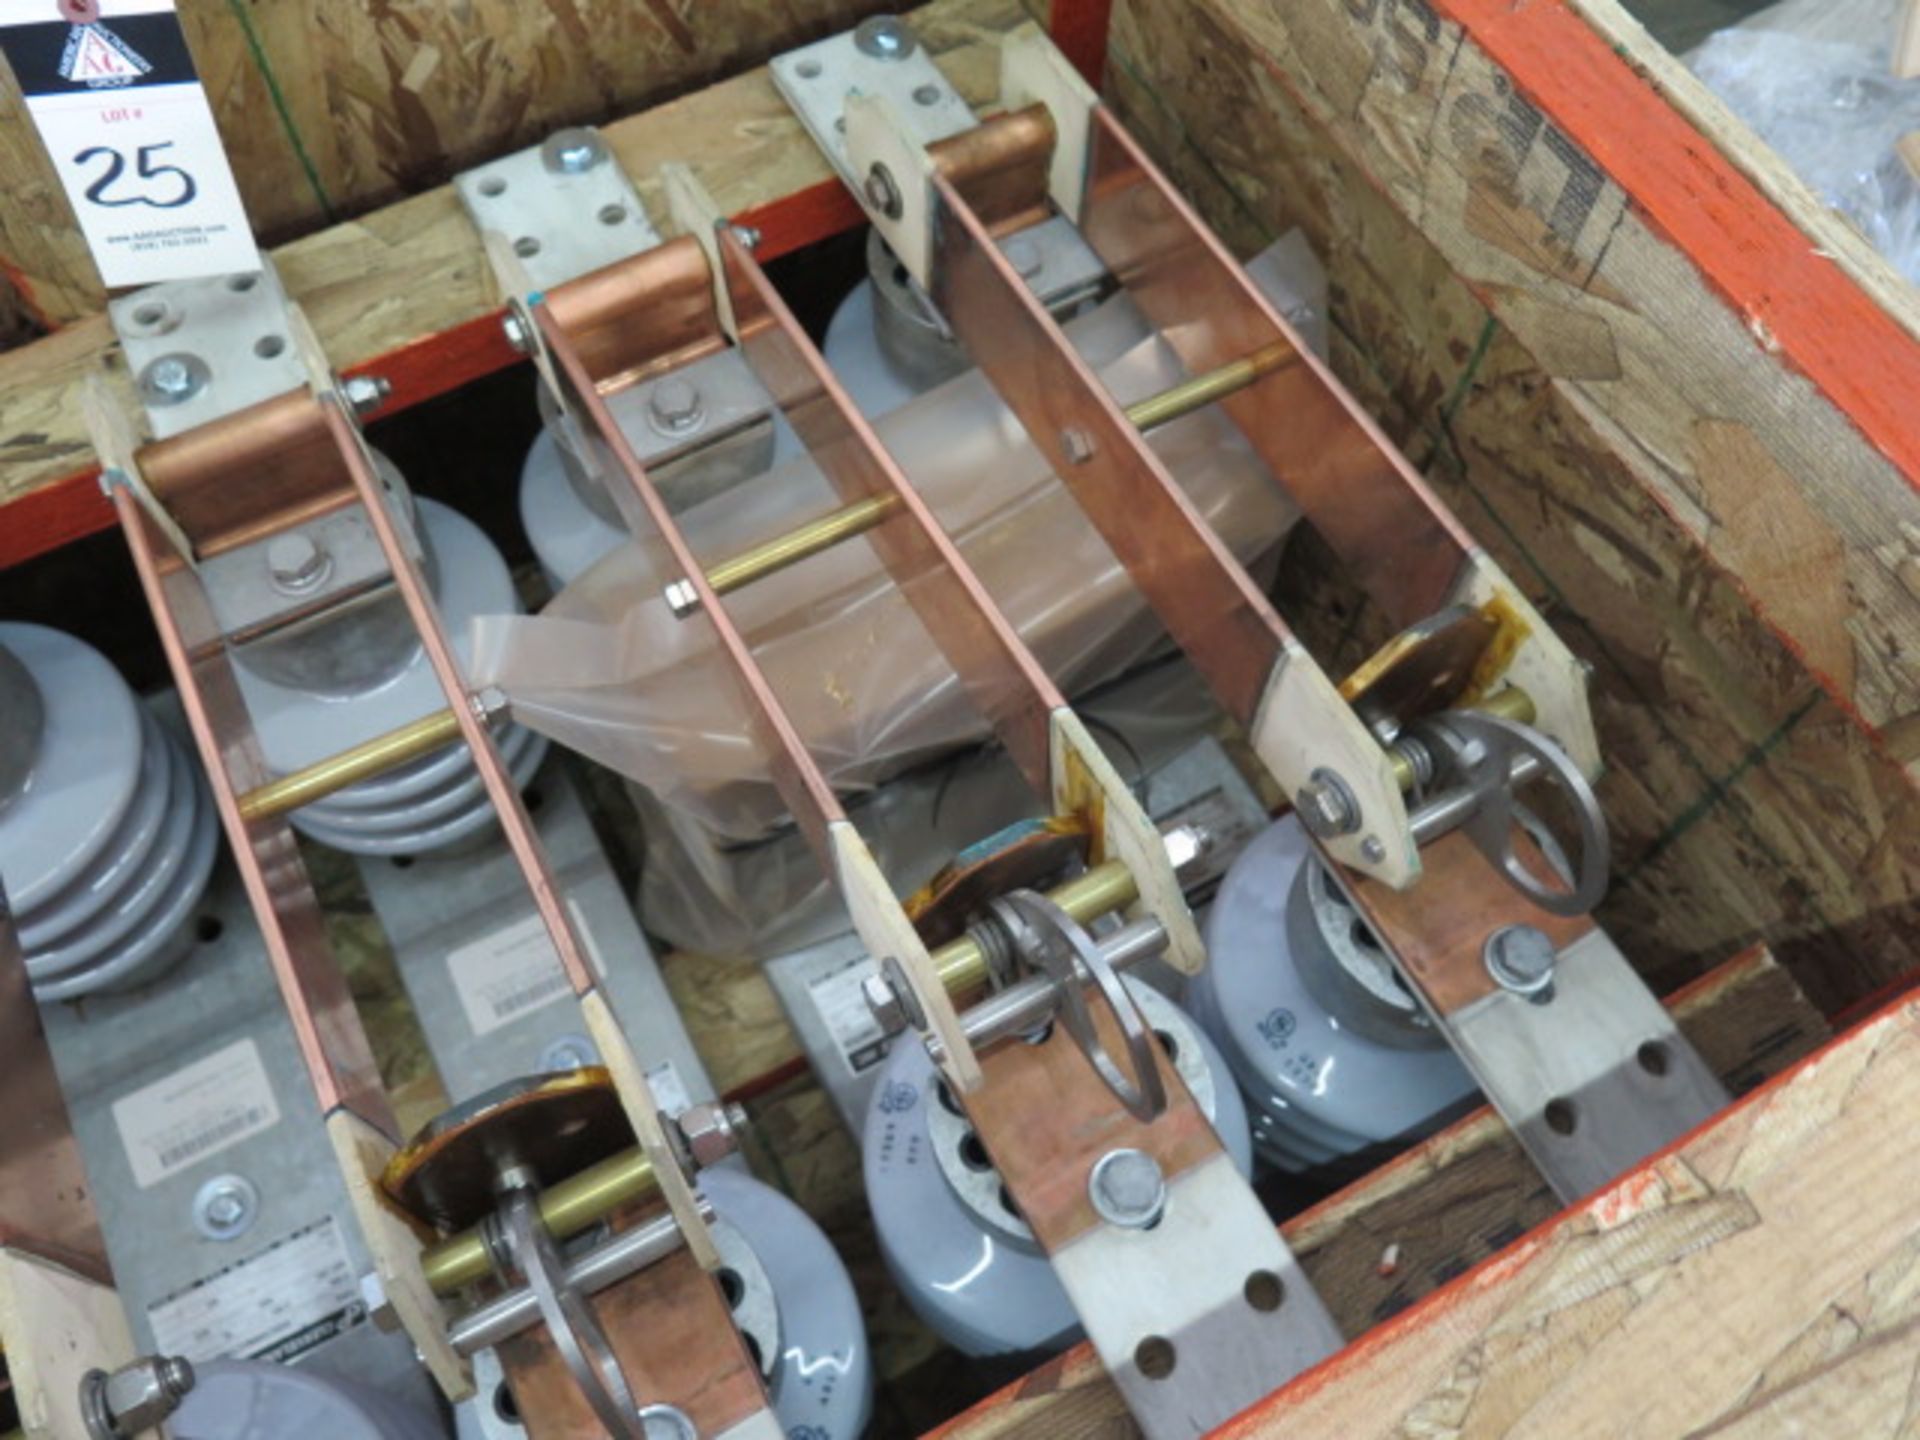 (5) 2016 Cleaveland / Price LCO-C 14.4/2000 Single Pole Disconnection Switches 14.4kV / 2000 Amp - Image 3 of 6